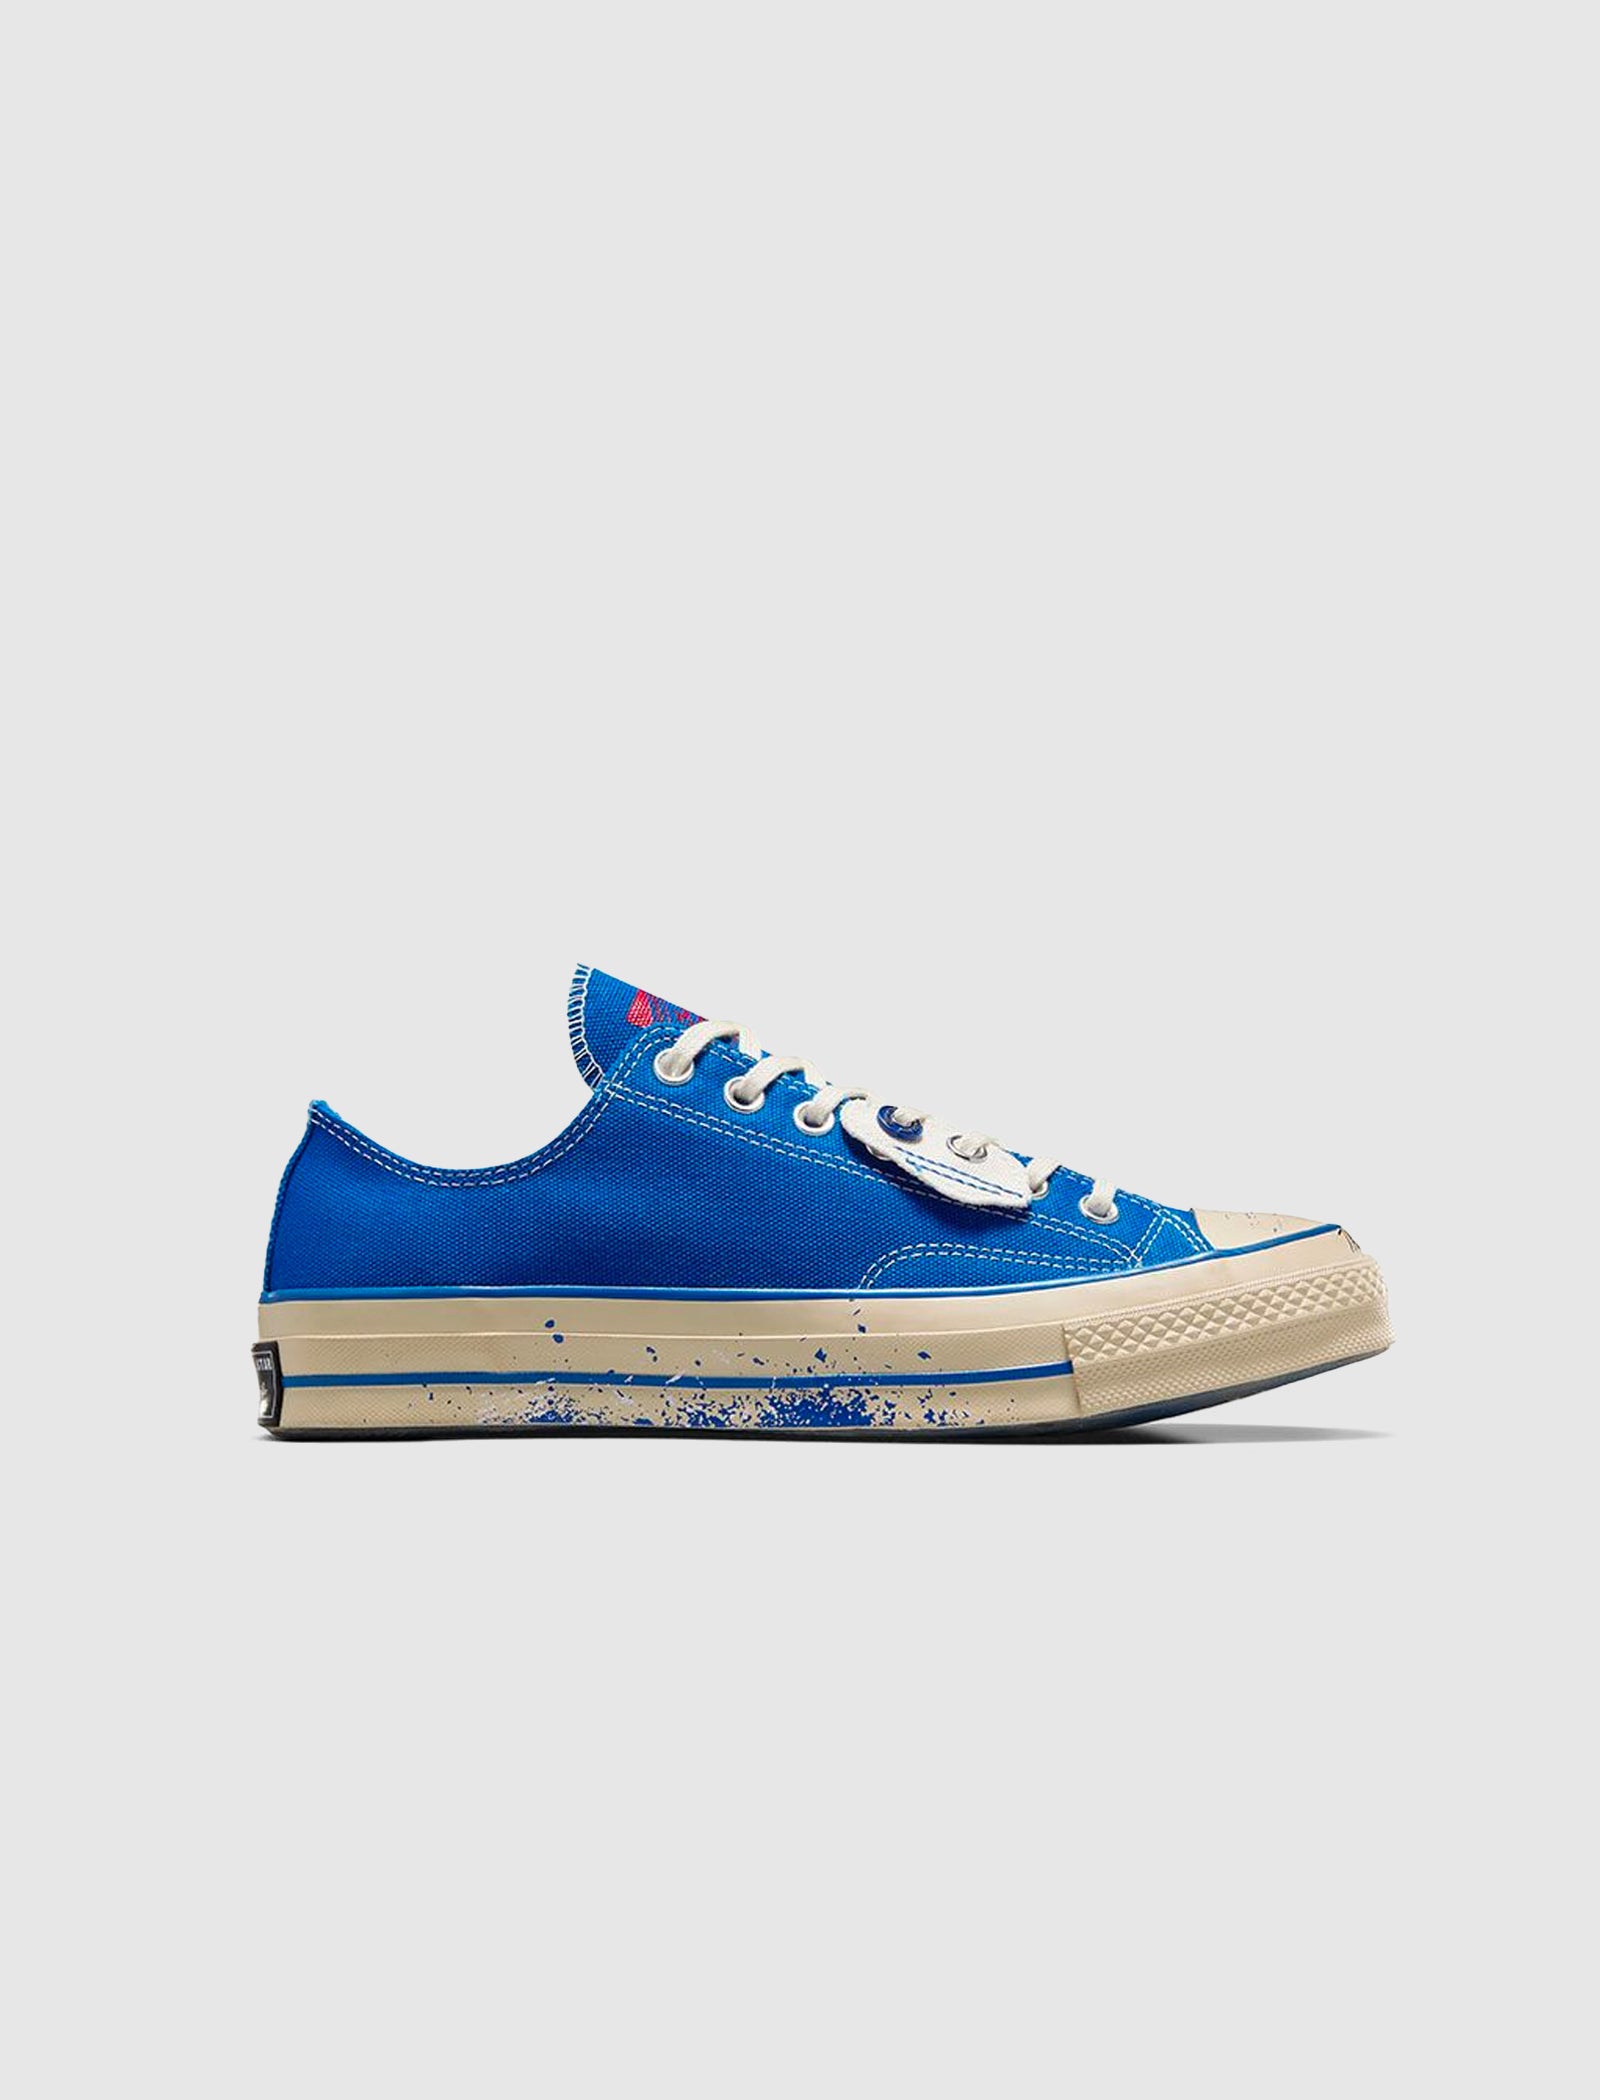 ADER ERROR X CHUCK 70 LOW "IMPERIAL BLUE"